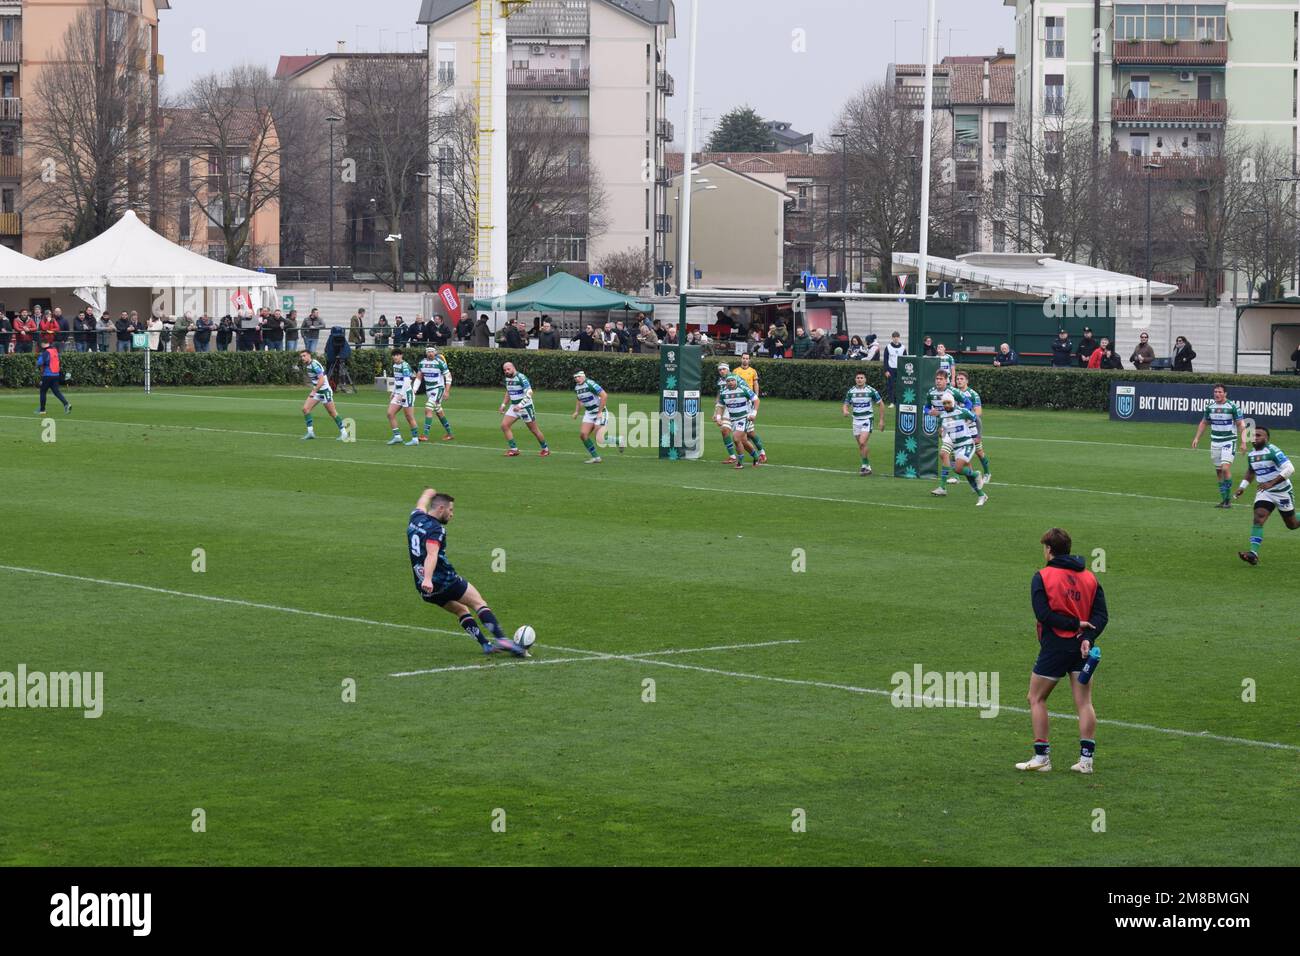 John Conney, Ulster Rugby, prepares to kick for goal during a match against Benetton rugby. The match was played in Treviso, Italy in January 2023 Stock Photo